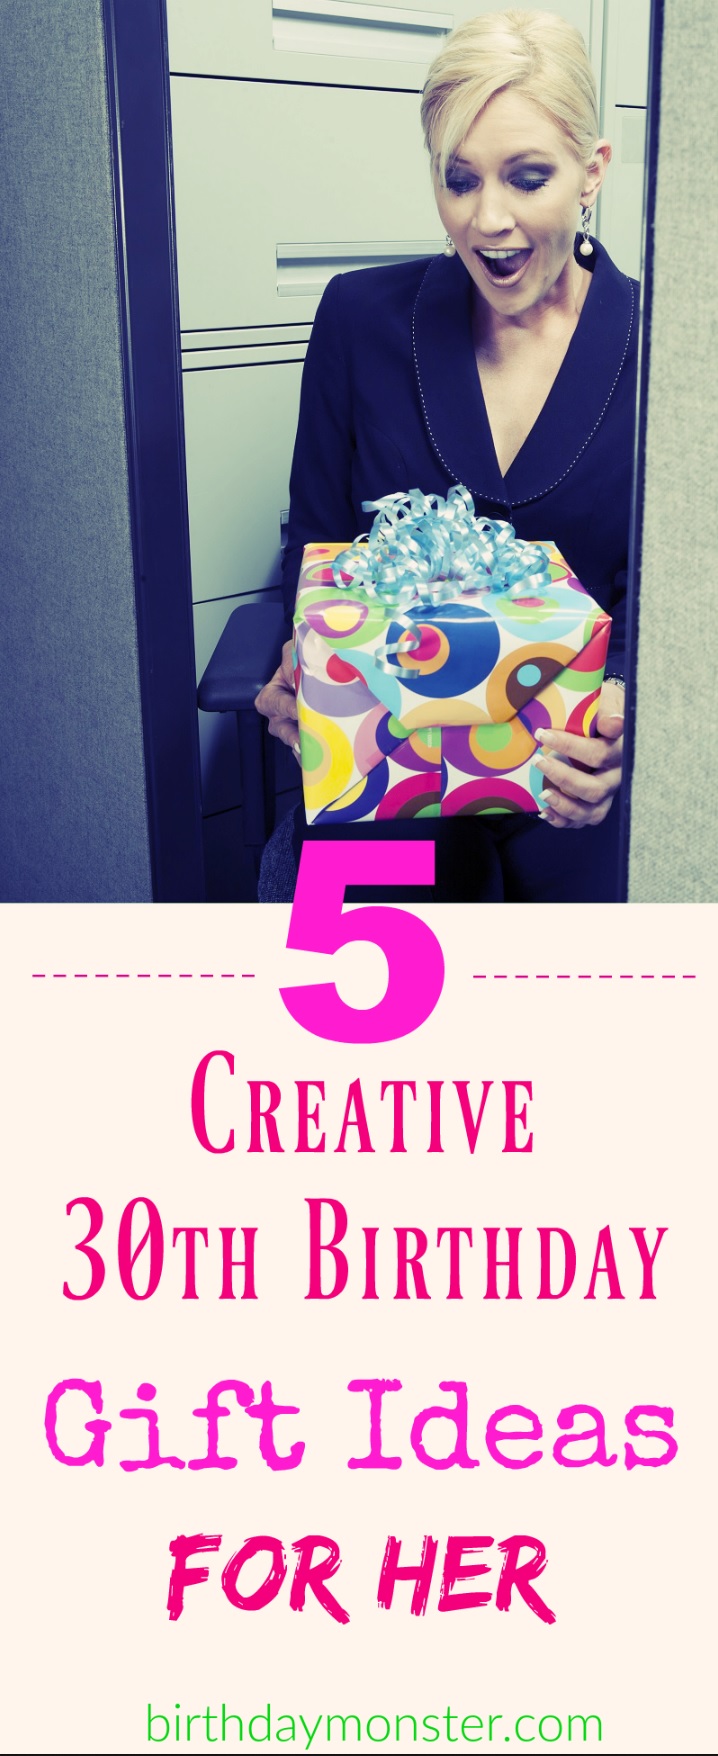 Creative 30th Birthday Gift Ideas For Her